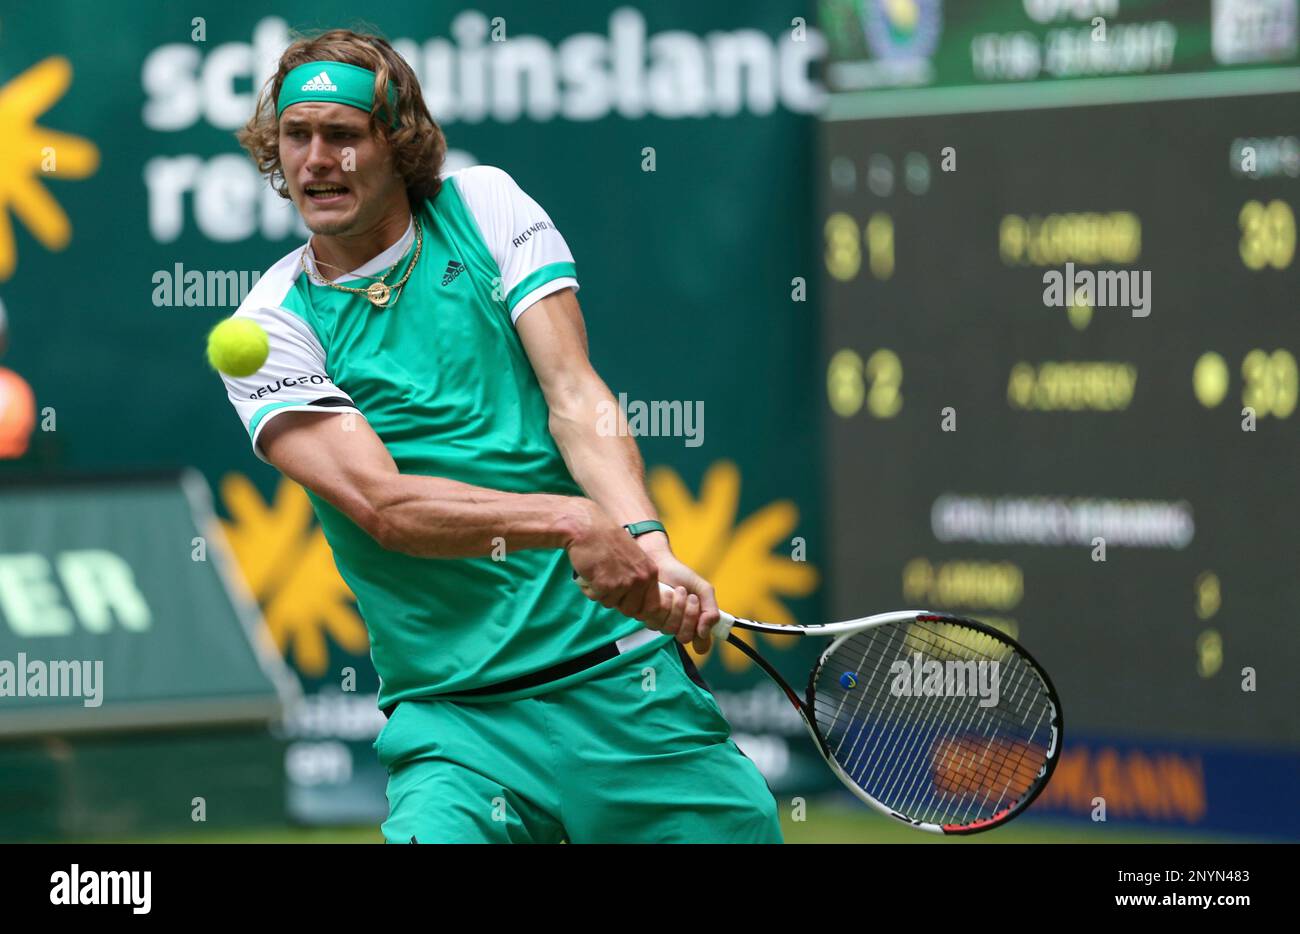 Germany's Alexander Zverev returns a shot to Italy's Paolo Lorenzi during  their match at the Gerry Weber Open ATP tennis tournament in Halle,  Germany, Tuesday, June 20, 2017. (Friso Gentsch/dpa via AP